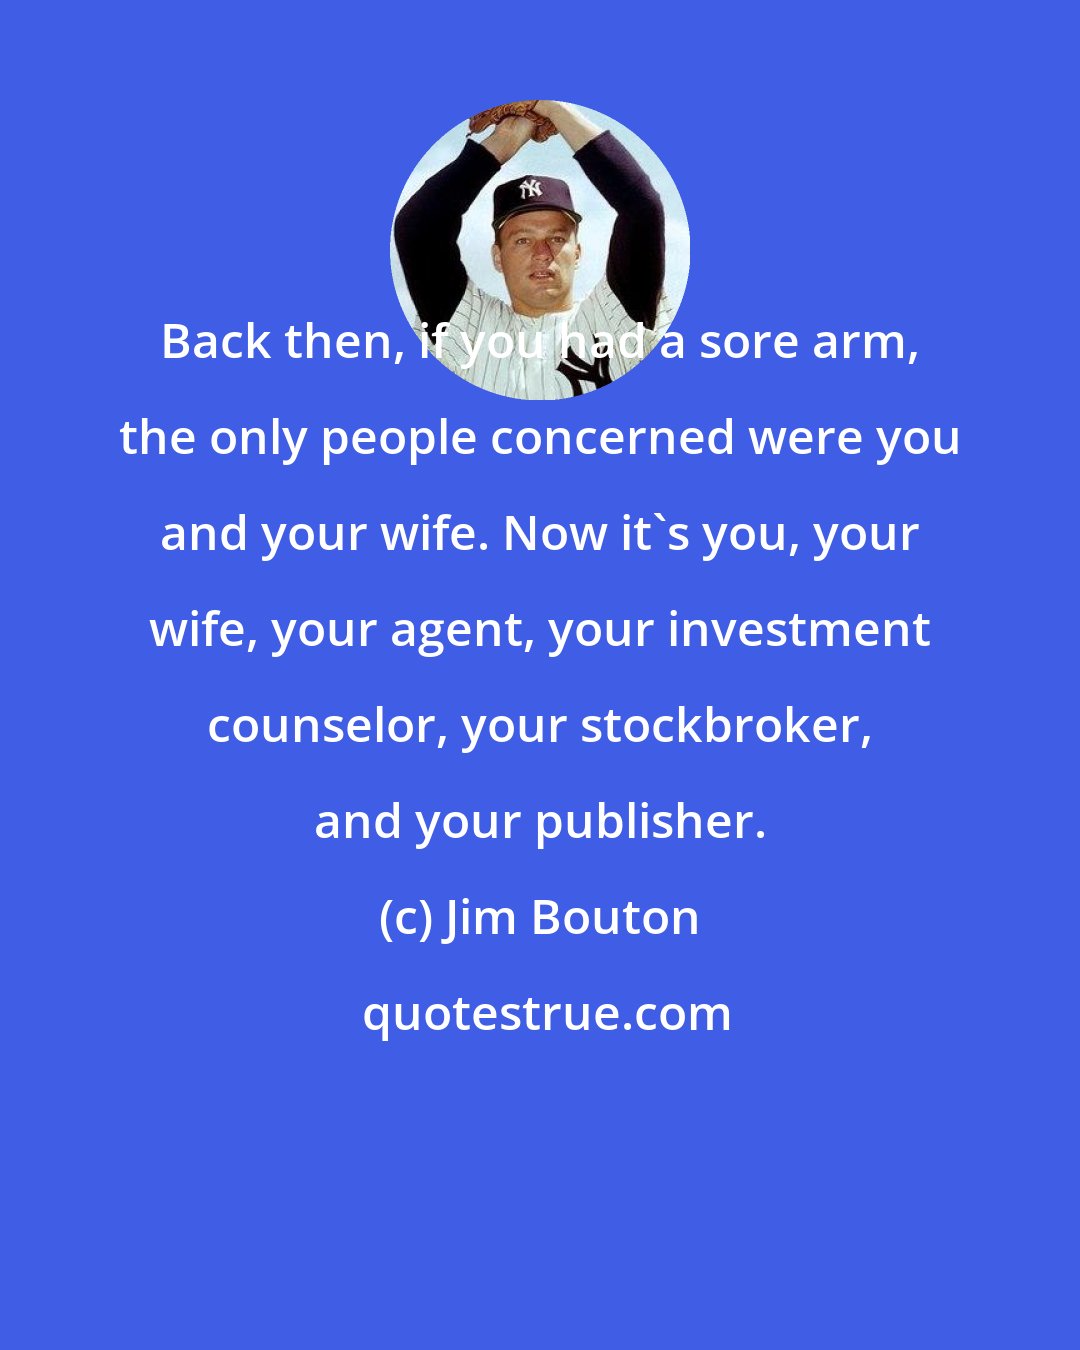 Jim Bouton: Back then, if you had a sore arm, the only people concerned were you and your wife. Now it's you, your wife, your agent, your investment counselor, your stockbroker, and your publisher.